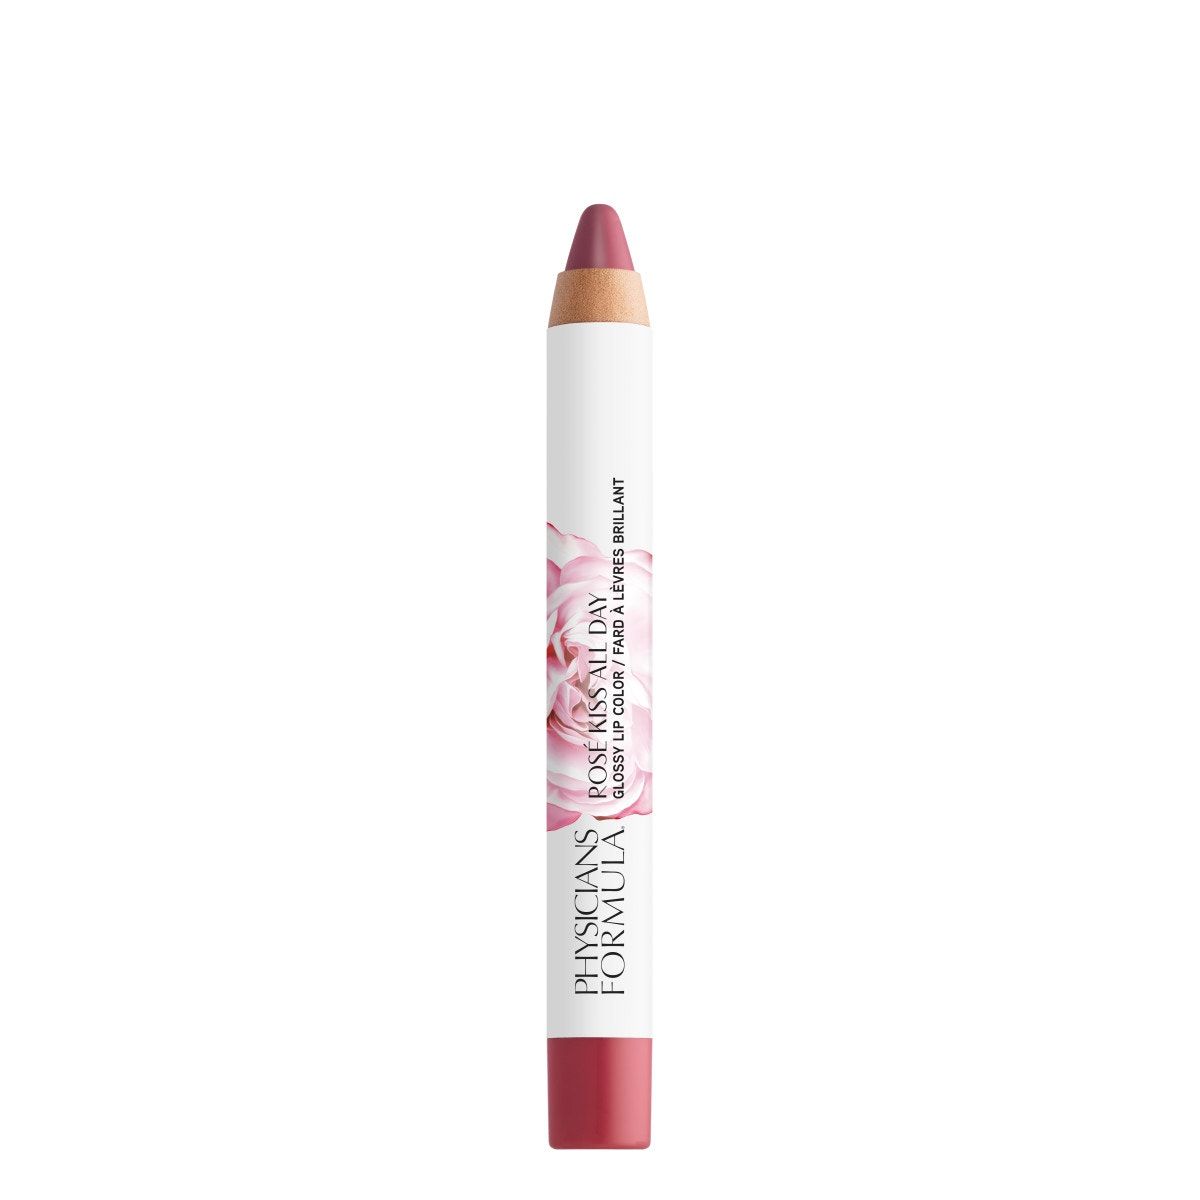 Physicians Formula Rosé All Day Glossy Lip Color Blushing Mauve